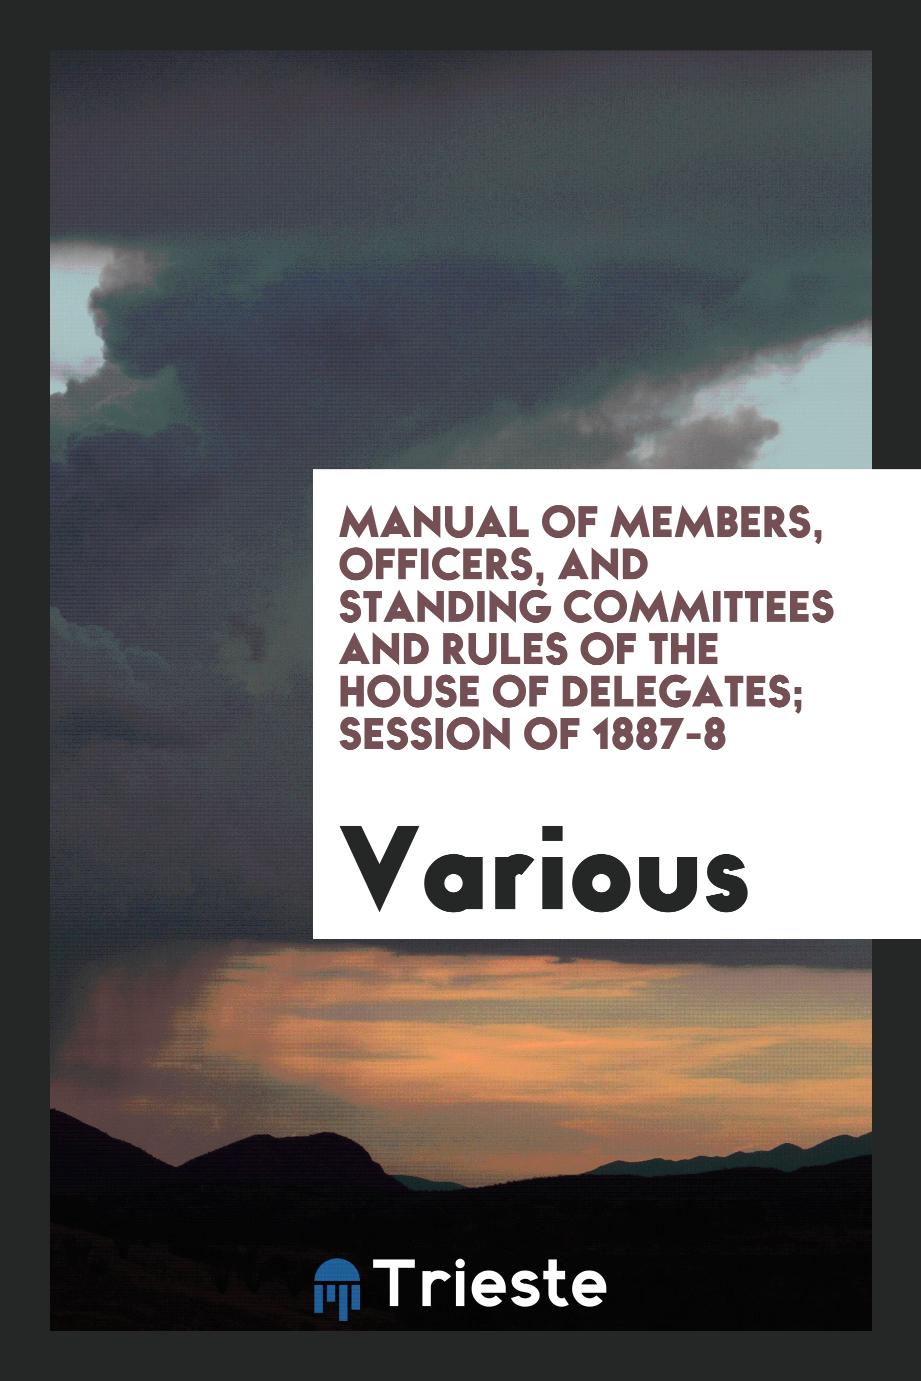 Manual of Members, Officers, and Standing Committees and Rules of the House of Delegates; Session of 1887-8